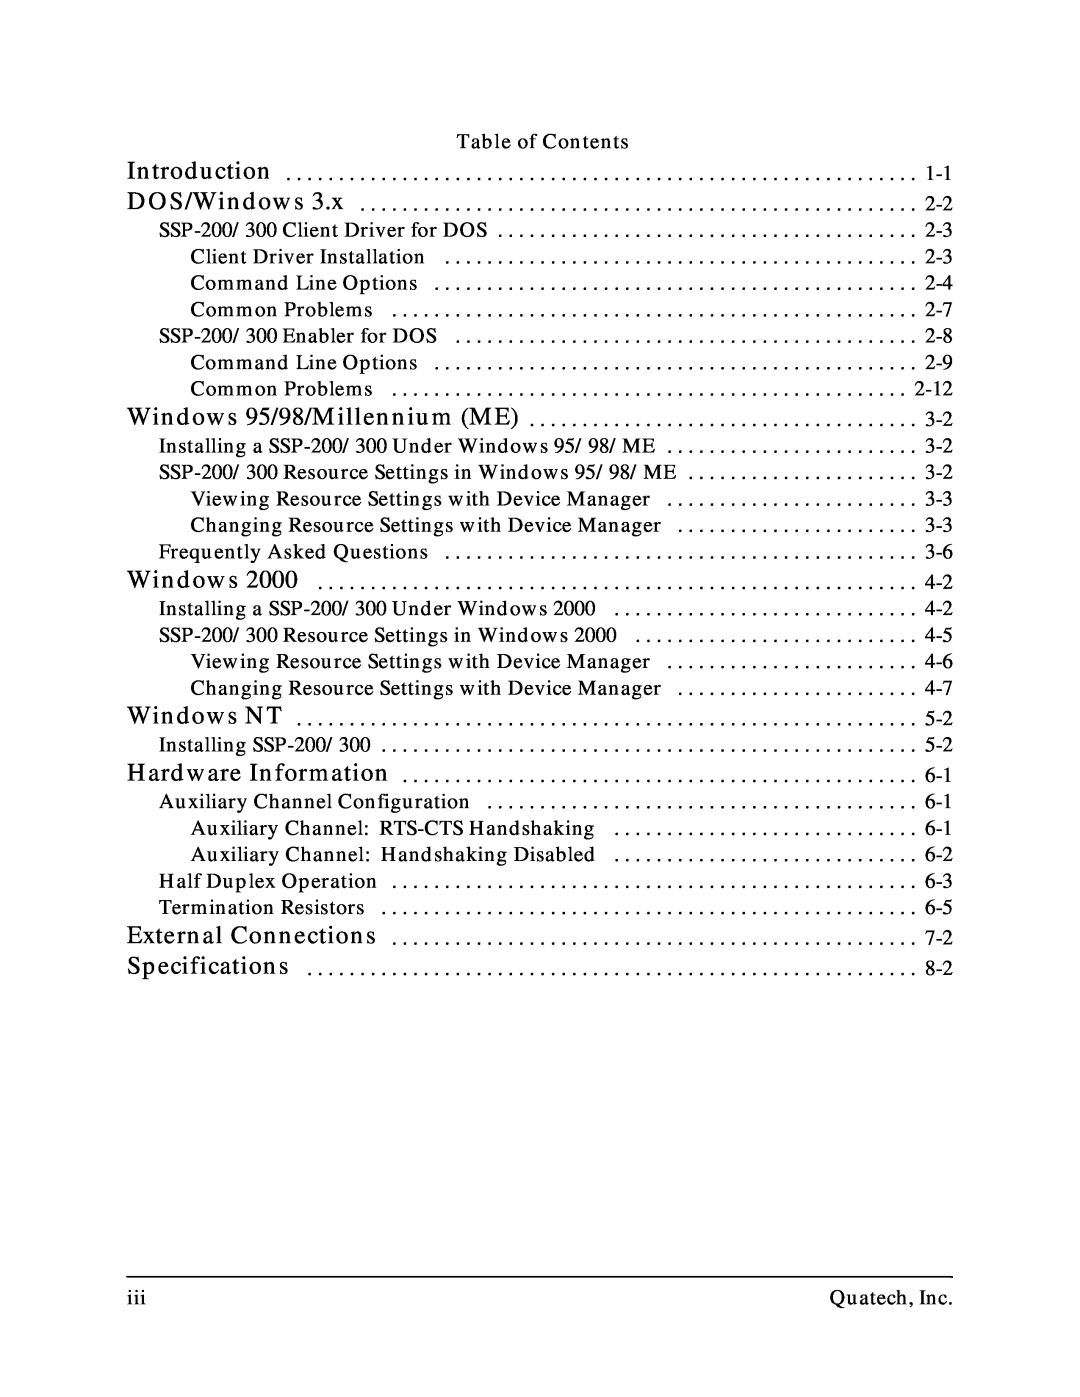 Quatech SSP-200, SSP-300 user manual Table of Contents 